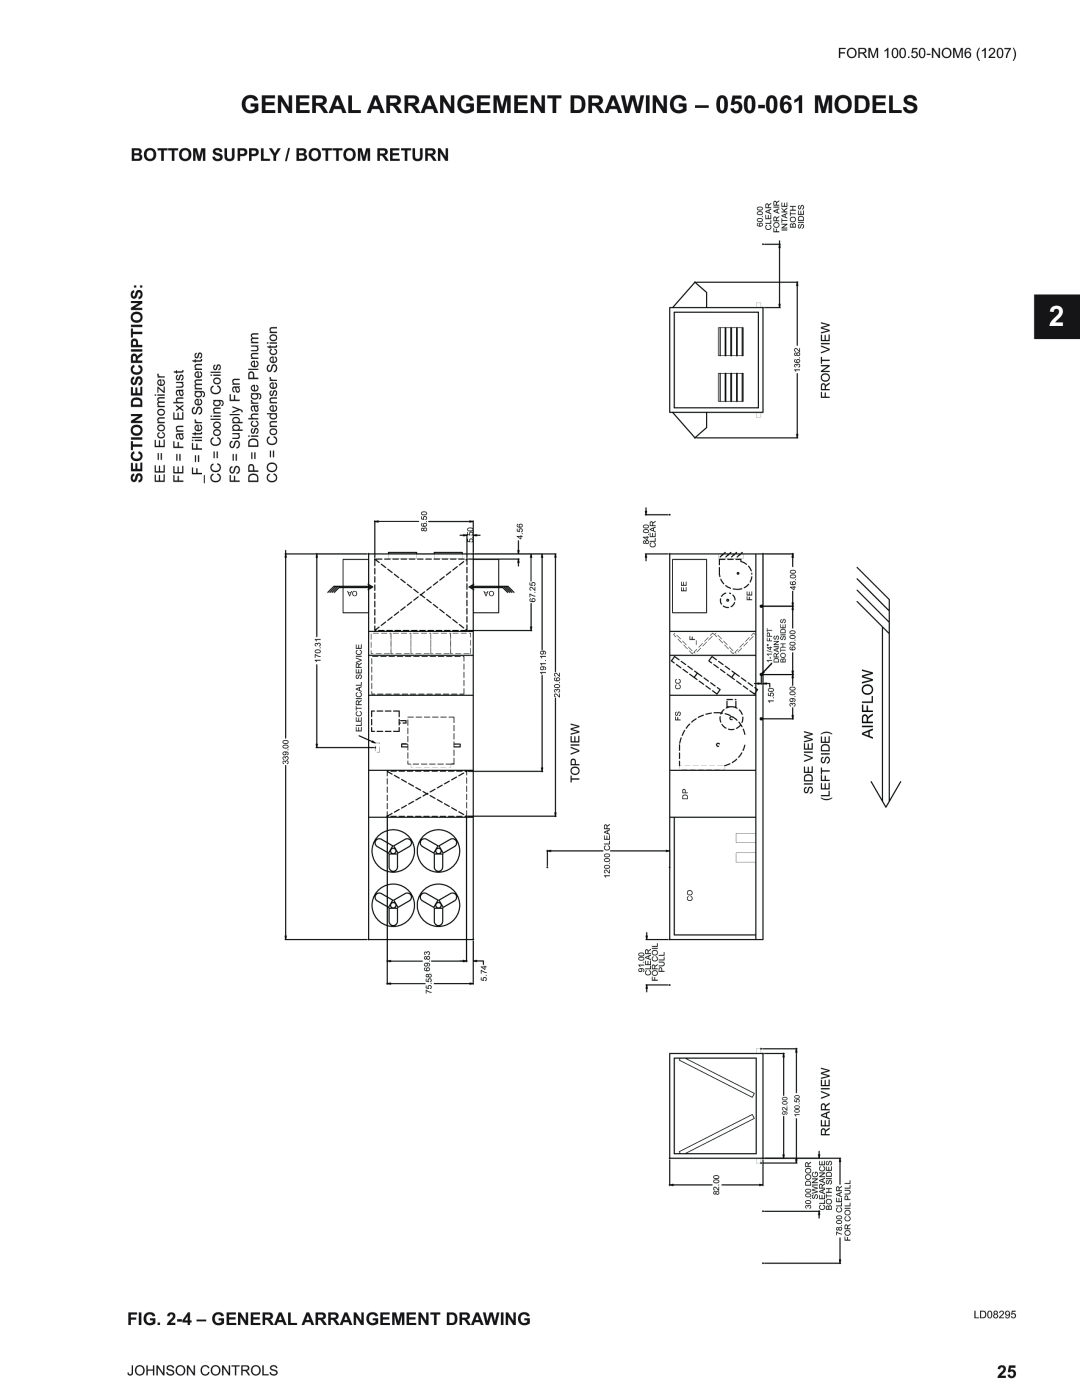 York YPAL 050, YPAL 061 General, Arrangement Drawing, Models, Bottom Supply / Bottom, Return, Airflow, Top View, Side View 